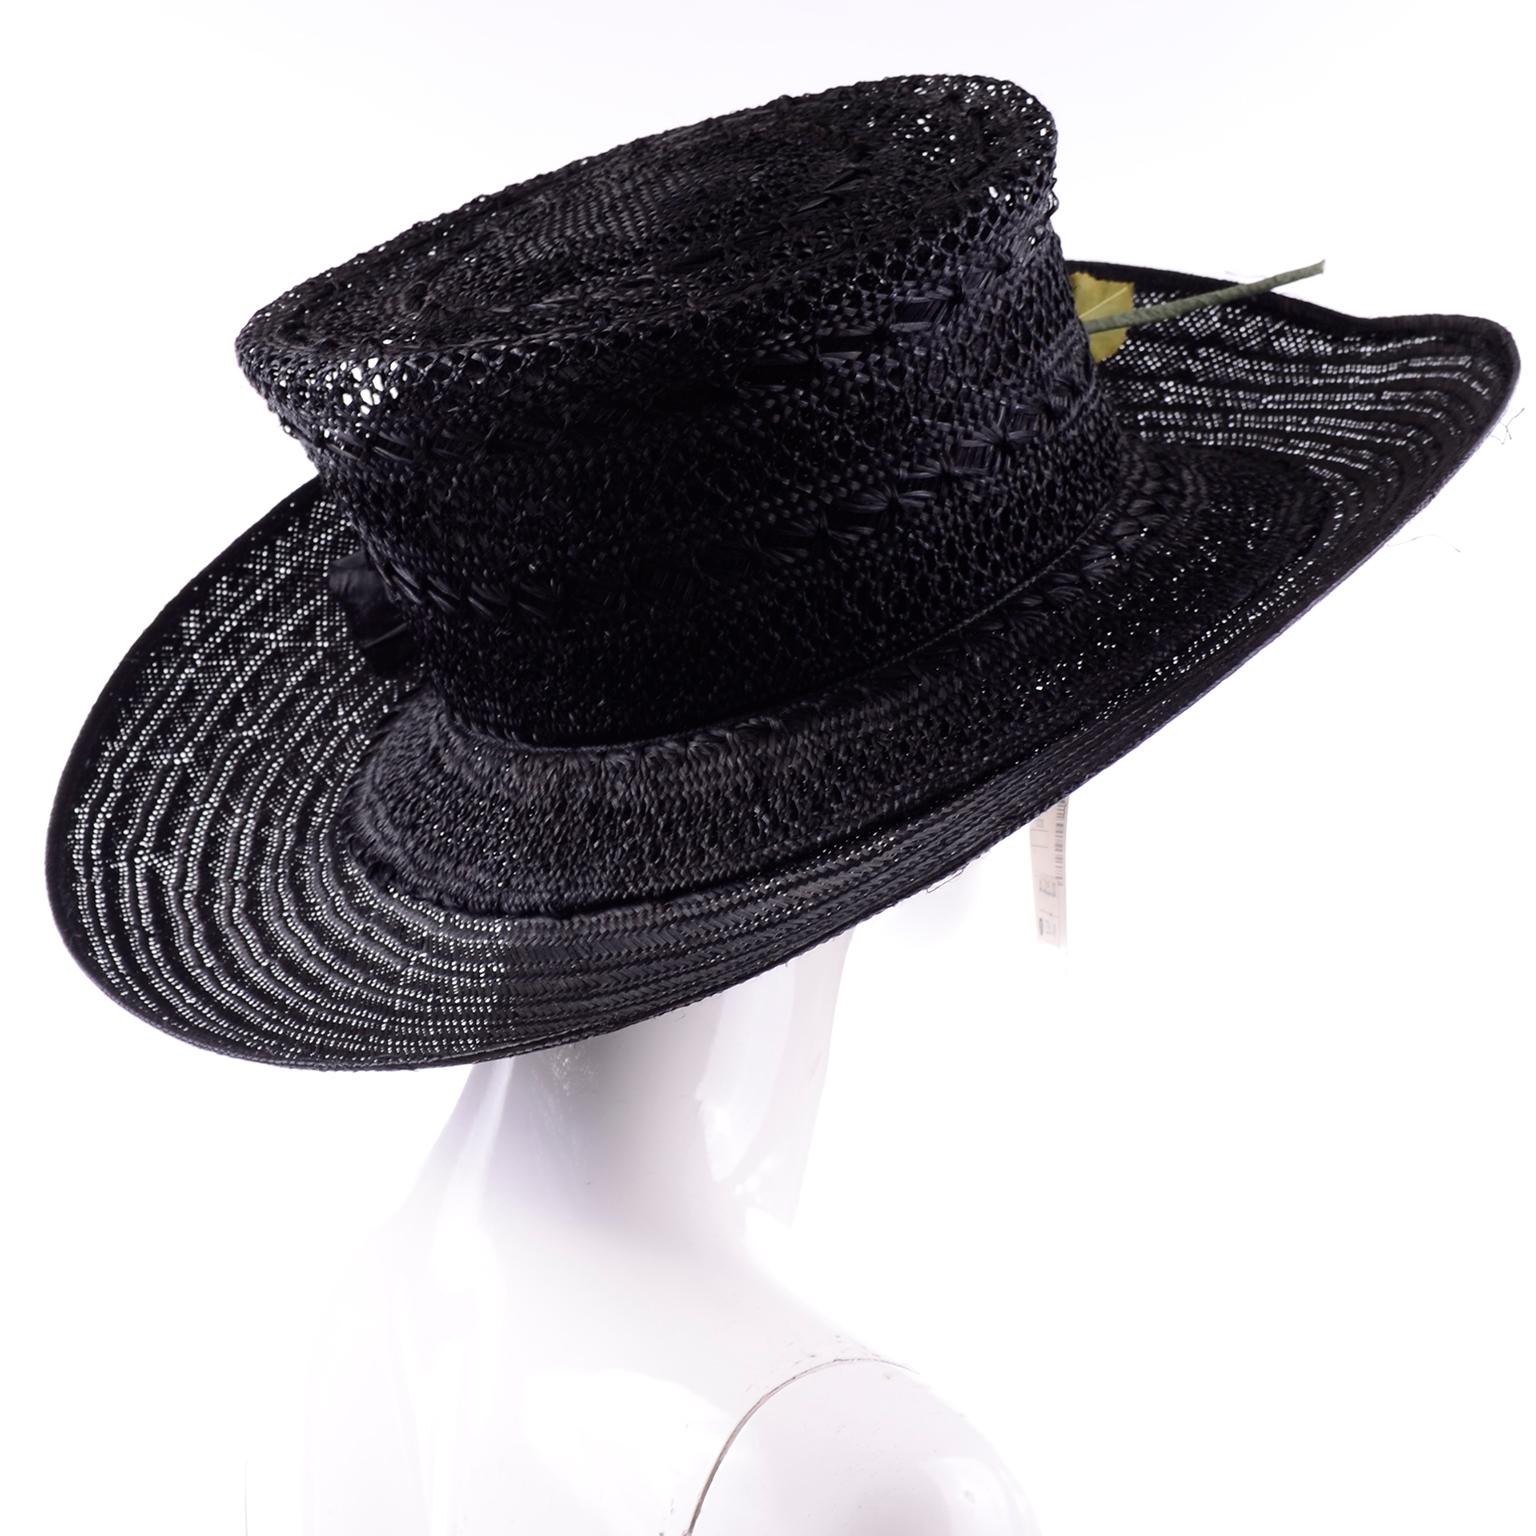 Women's Deadstock Saks Fifth Avenue Vintage Black Straw Upturned Brim Hat New With Tags